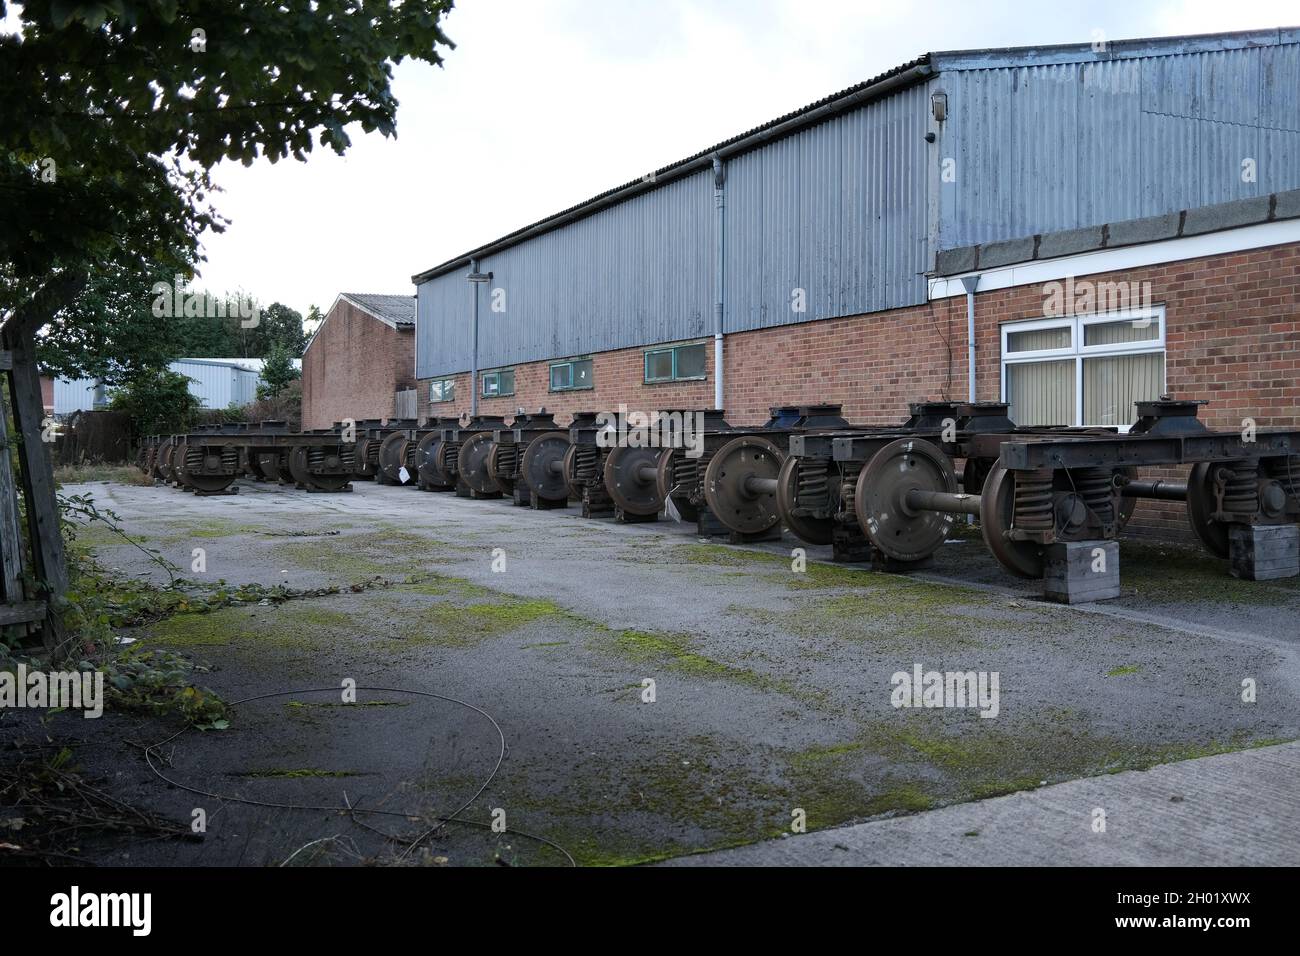 October 2021 - Locomotive and train wheels outside a workshop for refurbishment Stock Photo